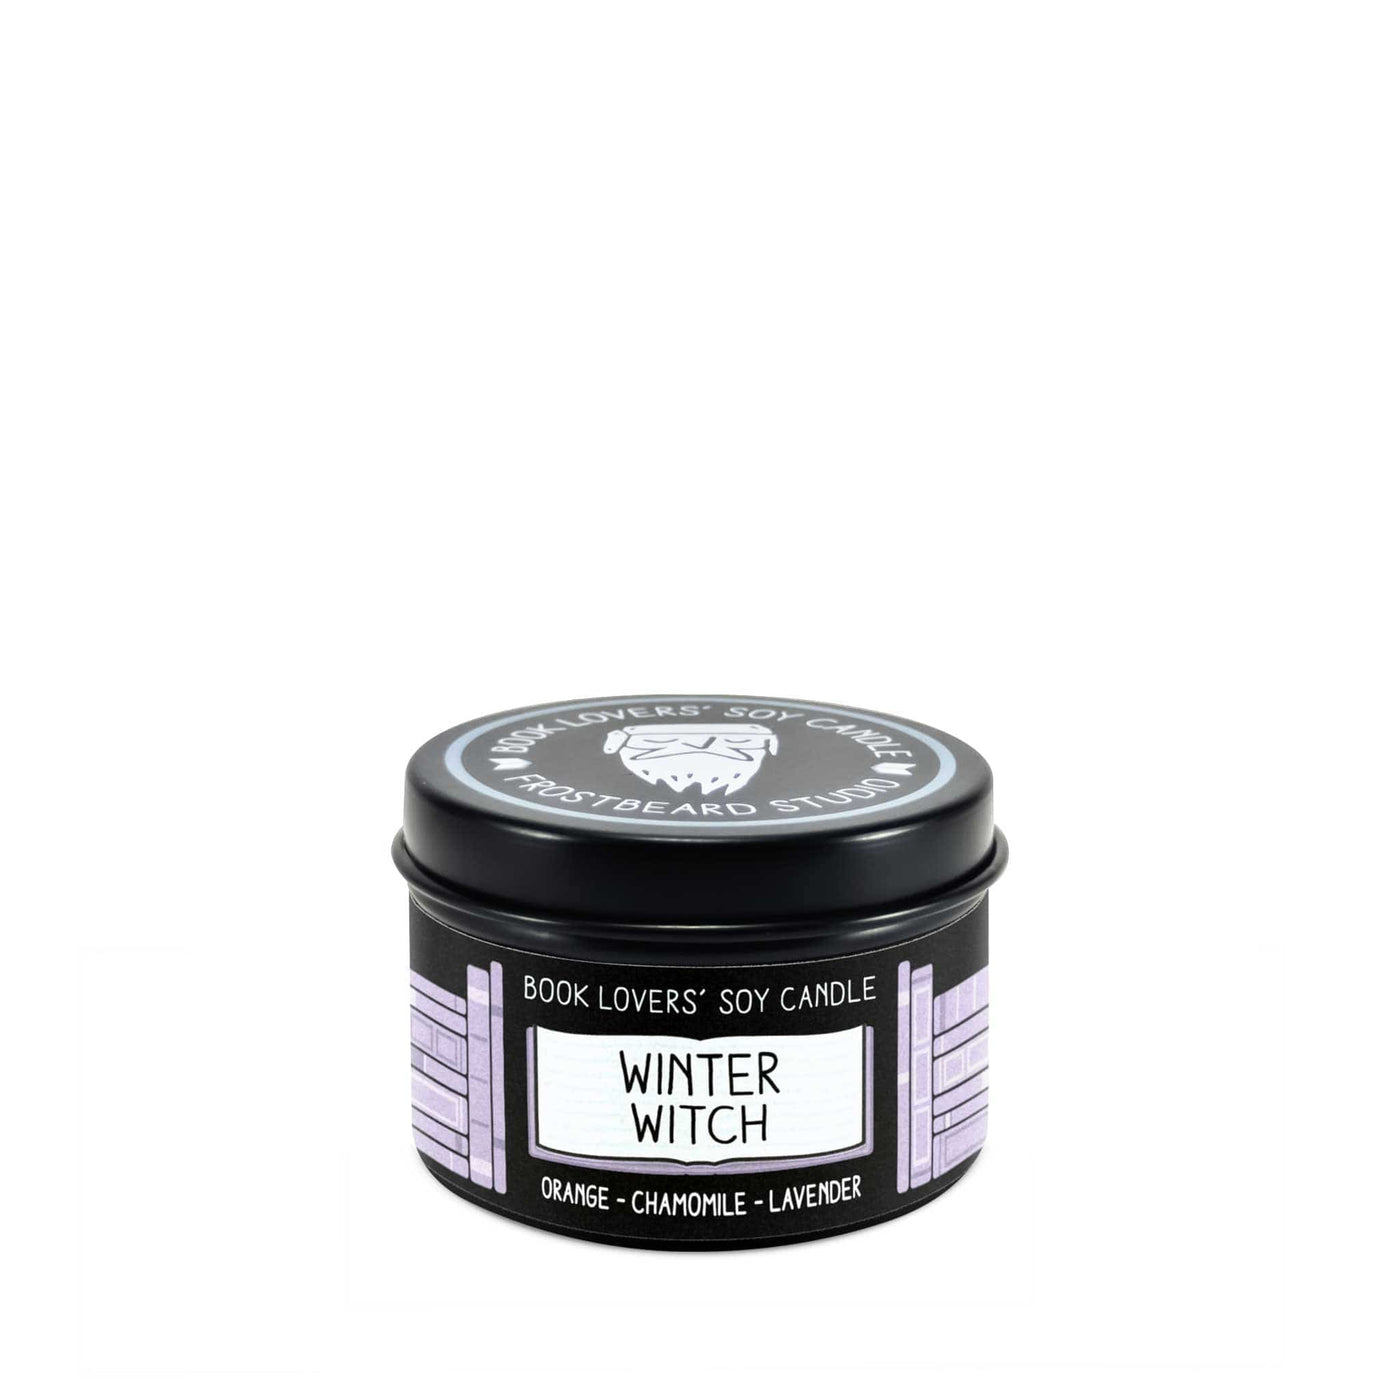 Winter Witch  -  2 oz Tin  -  Book Lovers' Soy Candle  -  Frostbeard Studio